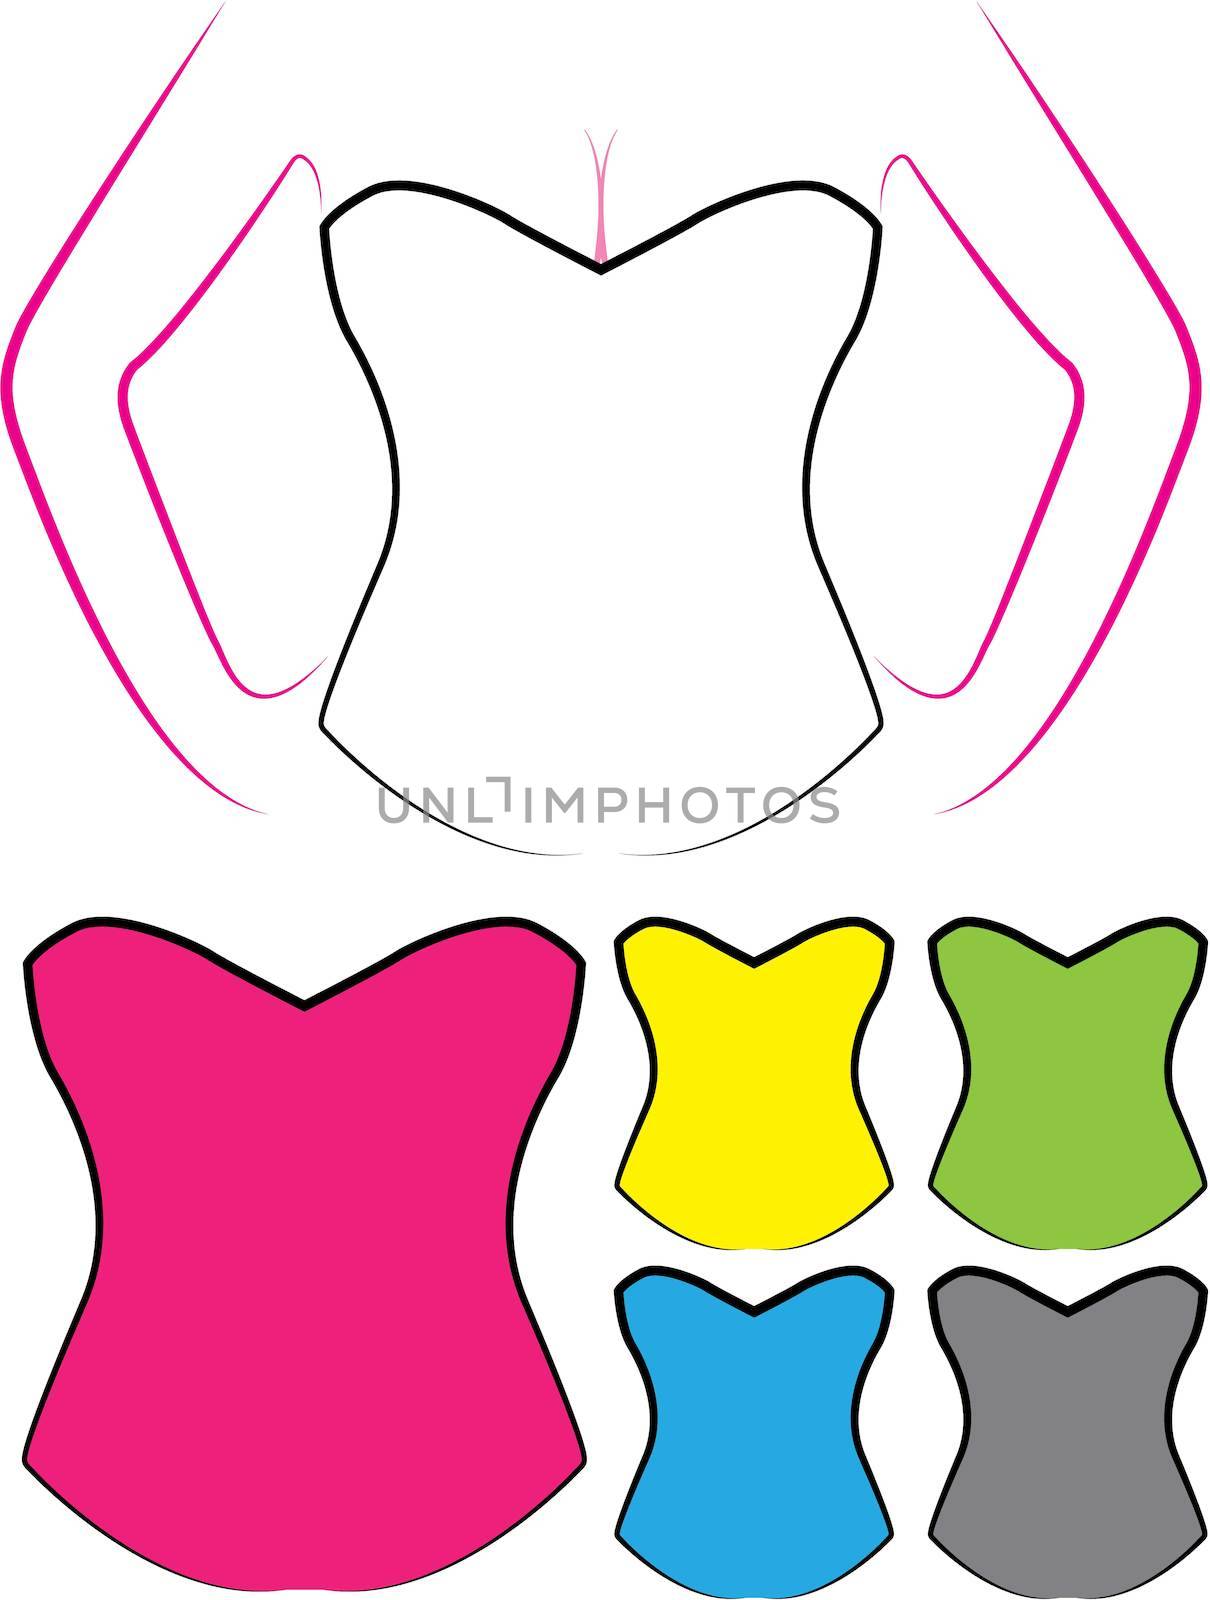 Illustration of Blank Oultines of Corsets with Different Styles by DragonEyeMedia